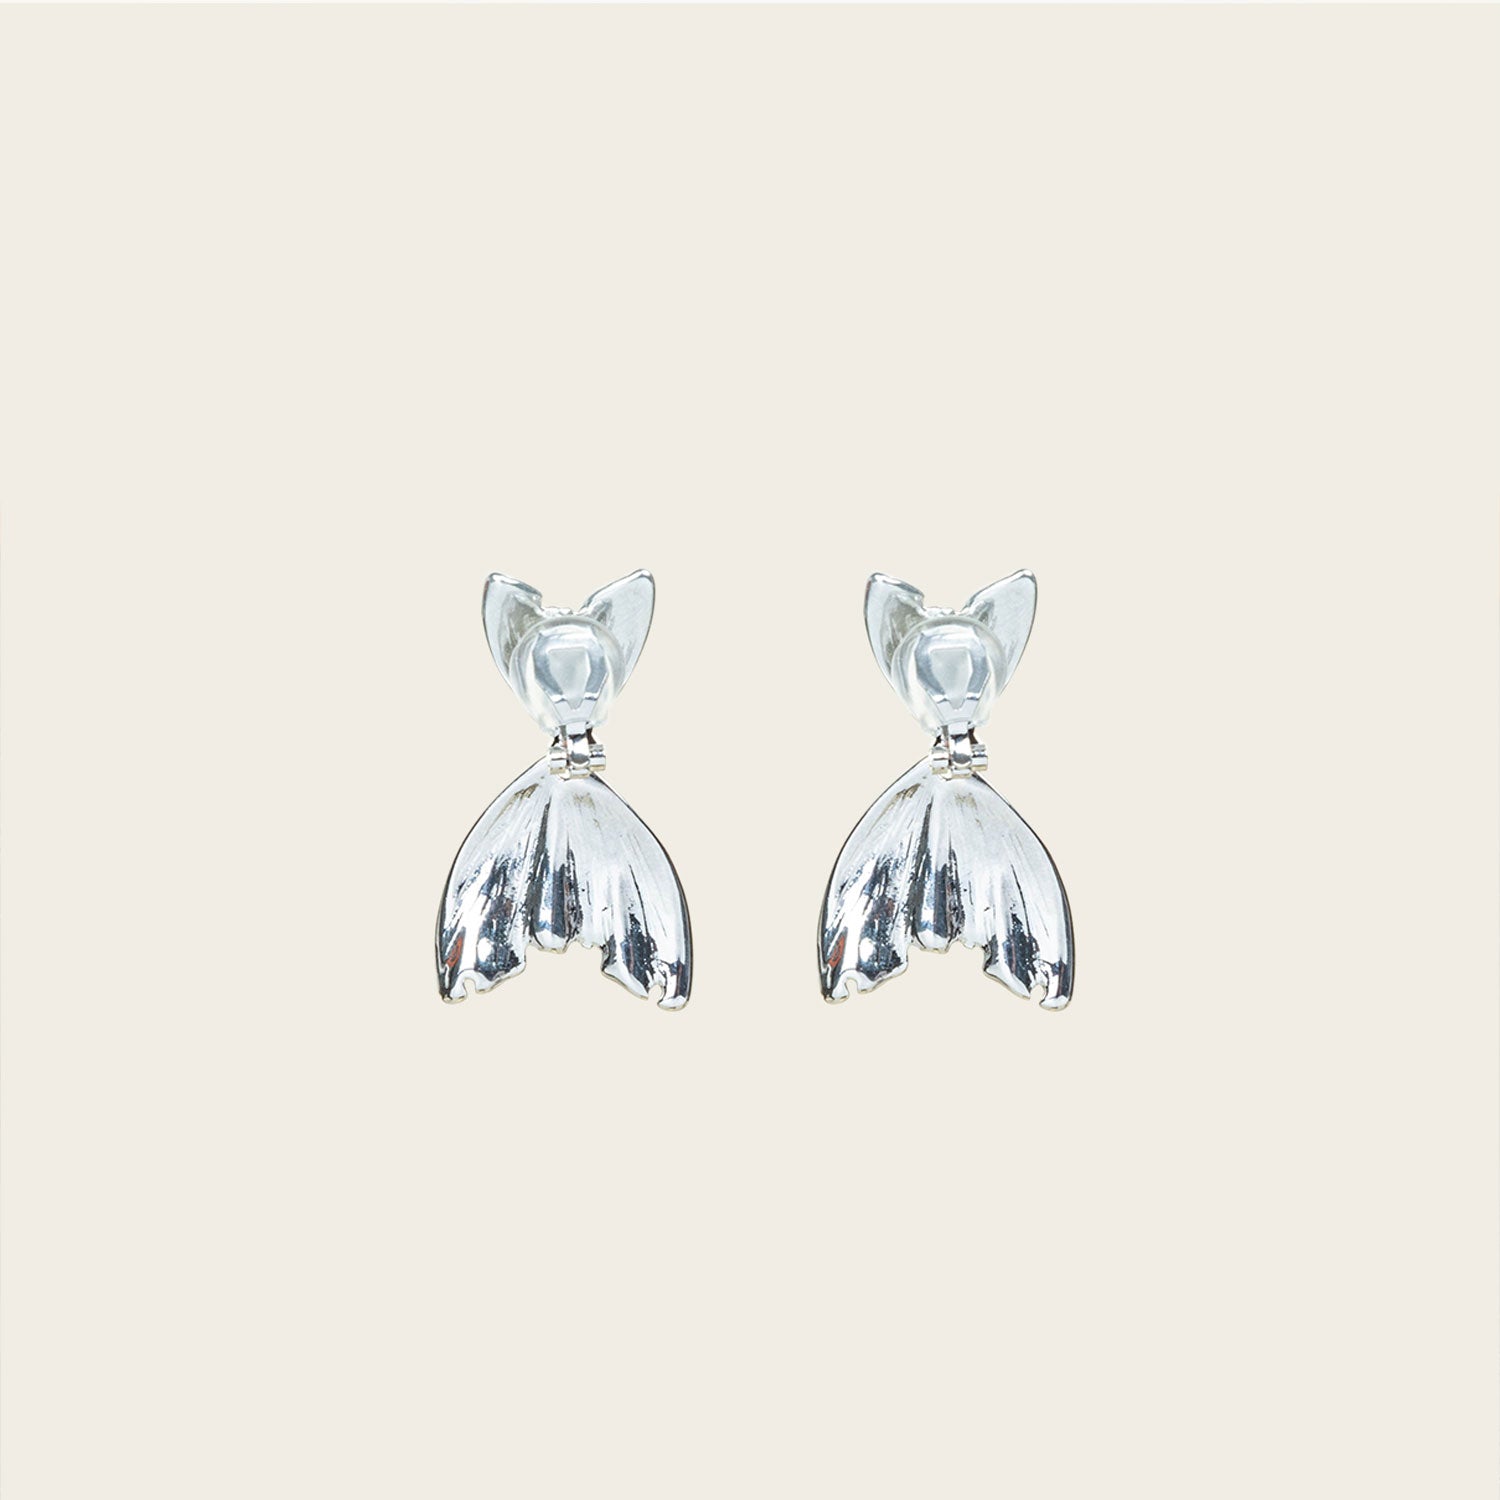 Image of the Mermaid Tail Clip On Earrings crafted in Silver Tone Zinc Alloy provide a secure hold for 8 to 12 hours. Padded Clip-On style is ideal for all ear types, and the earrings come as one pair with removable rubber padding. No adjustments possible.